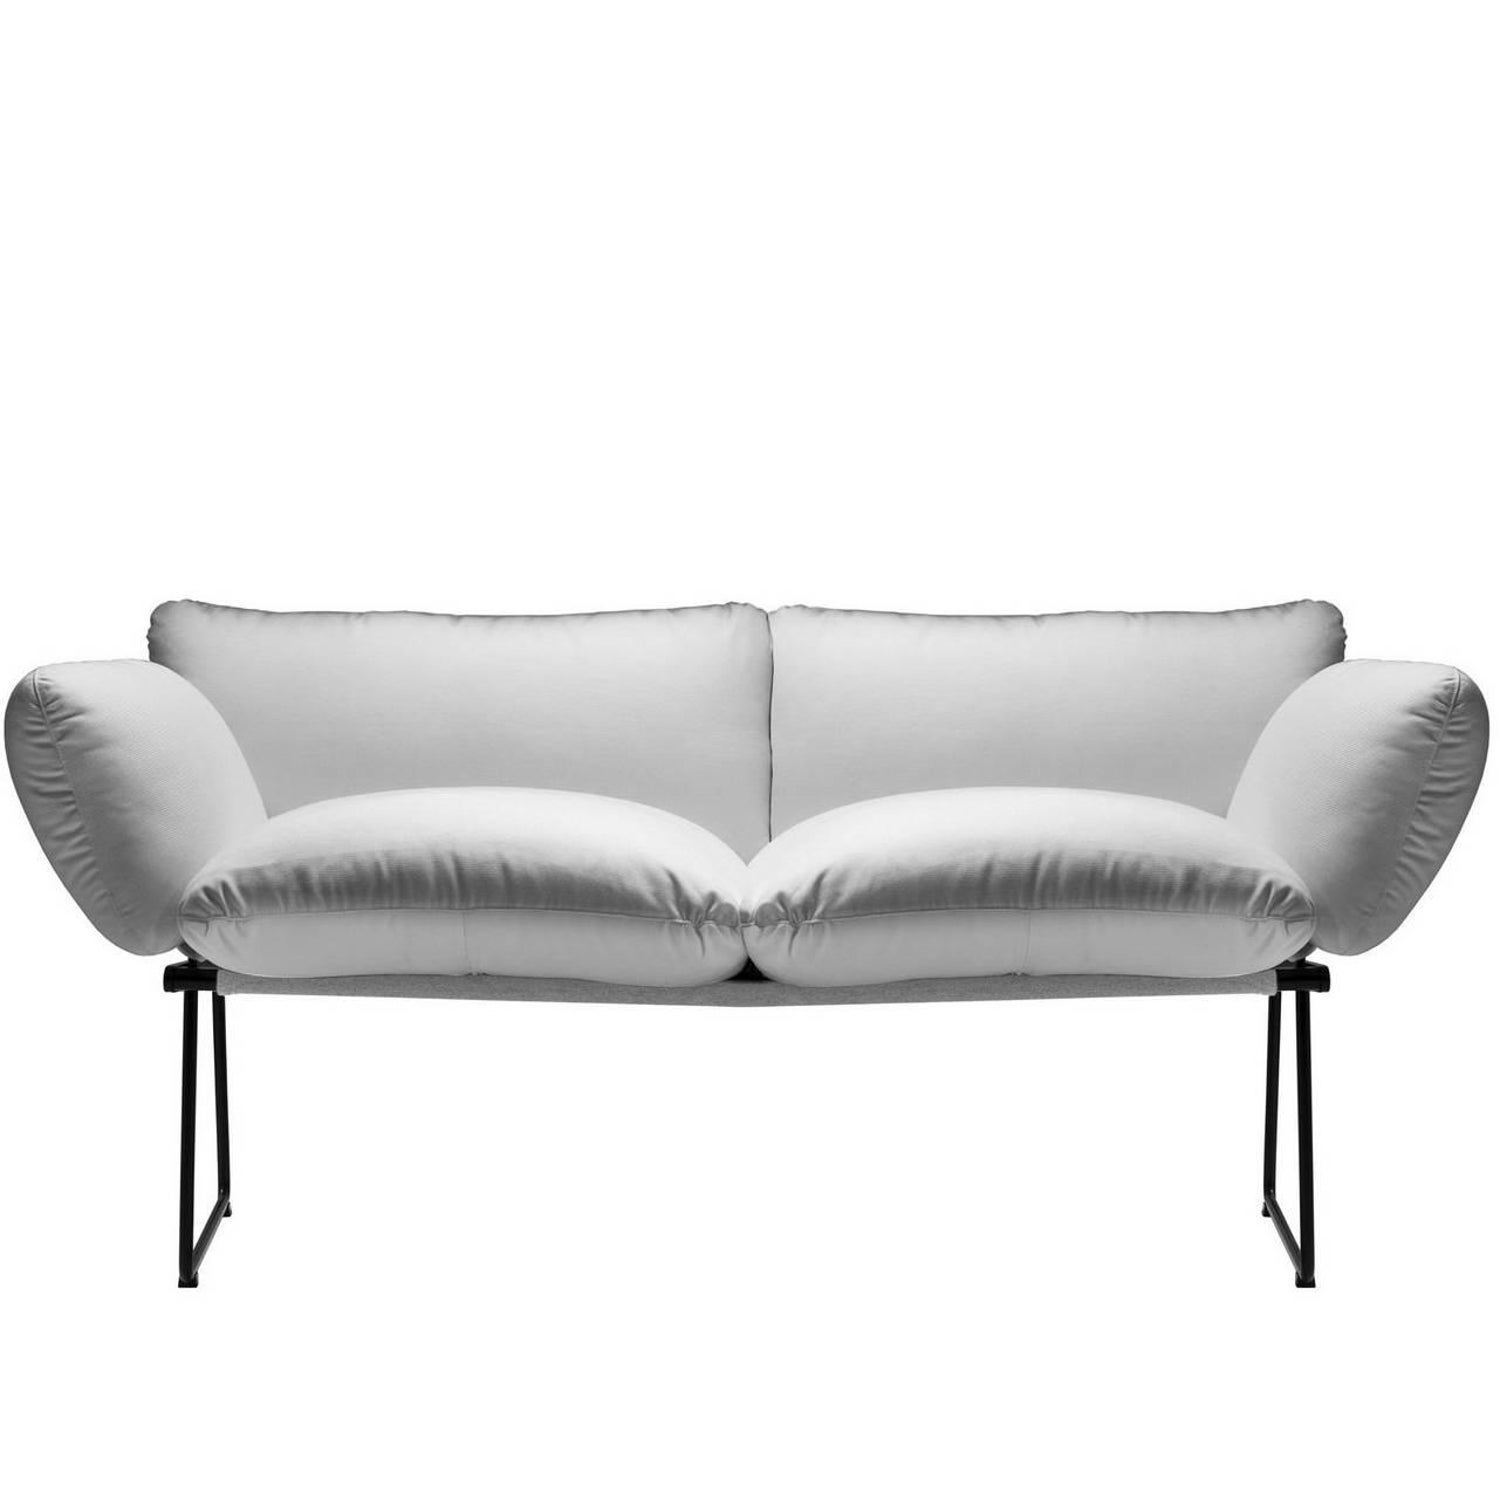 Elisa" Outdoor Three-Seat Sofa Designed by Enzo Mari for Driade For Sale at  1stDibs | elisa driade, enzo mari sofa, elisa enzo mari